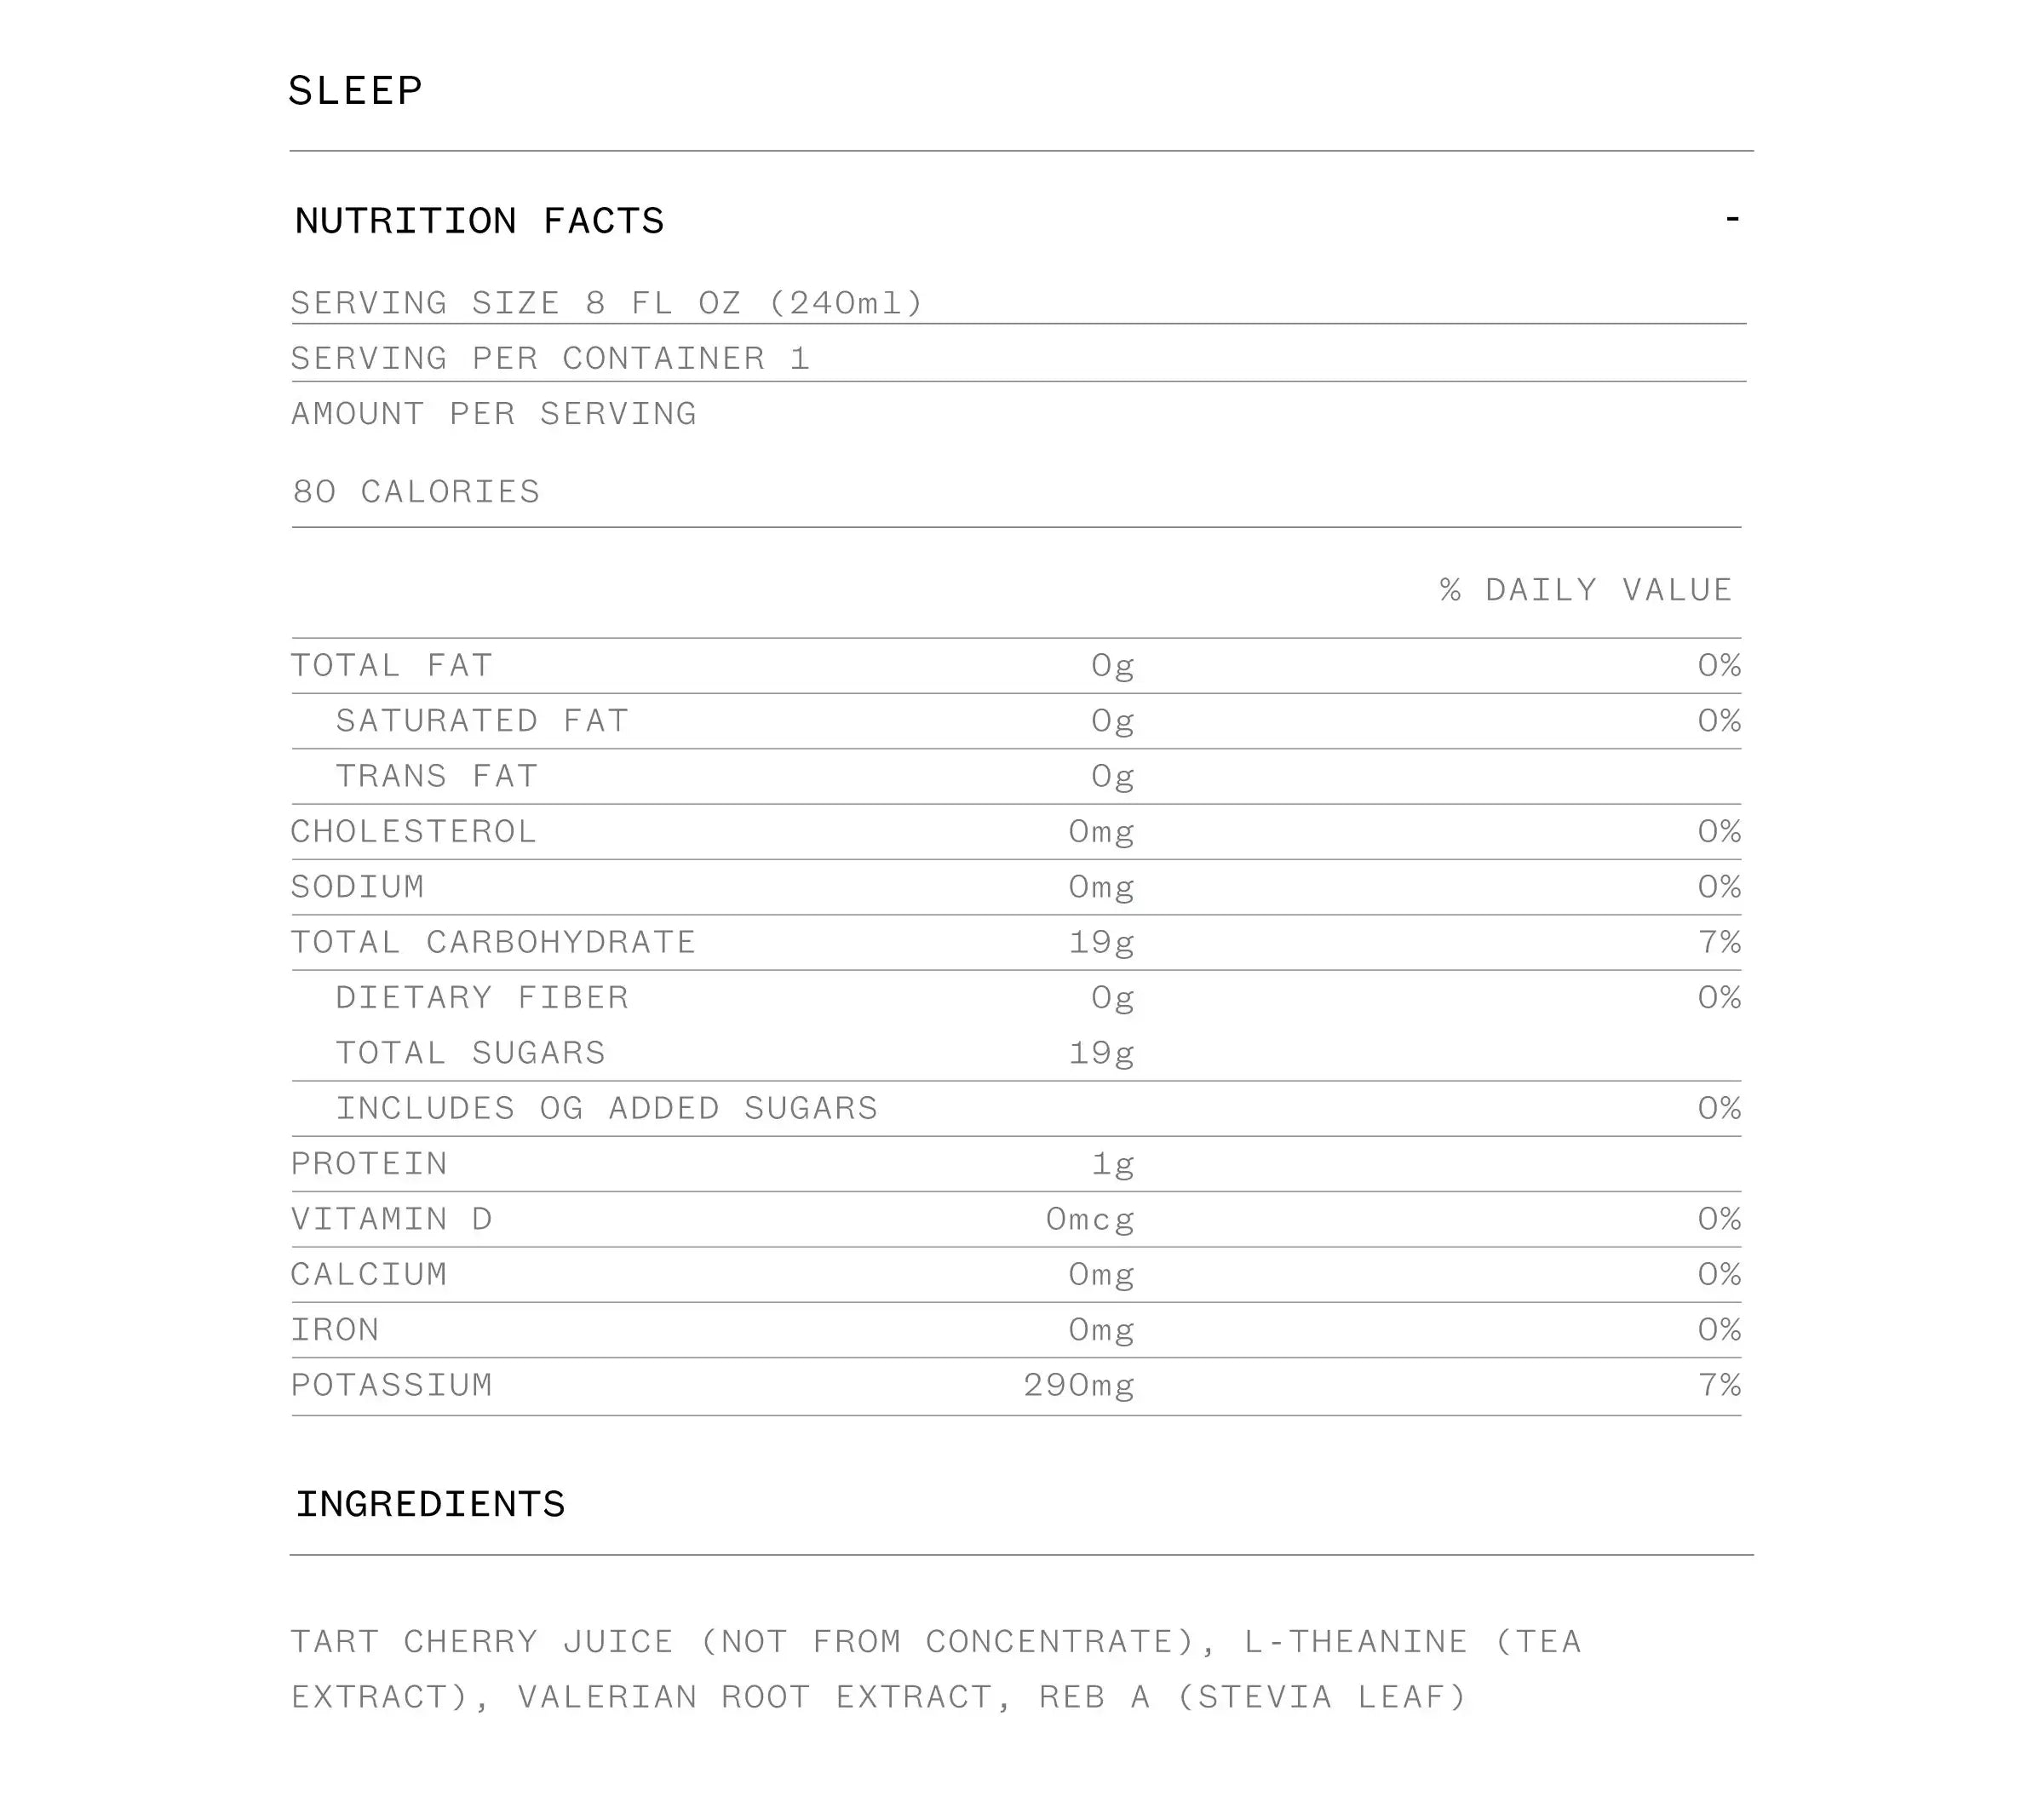 Nutrition Facts and Ingredients